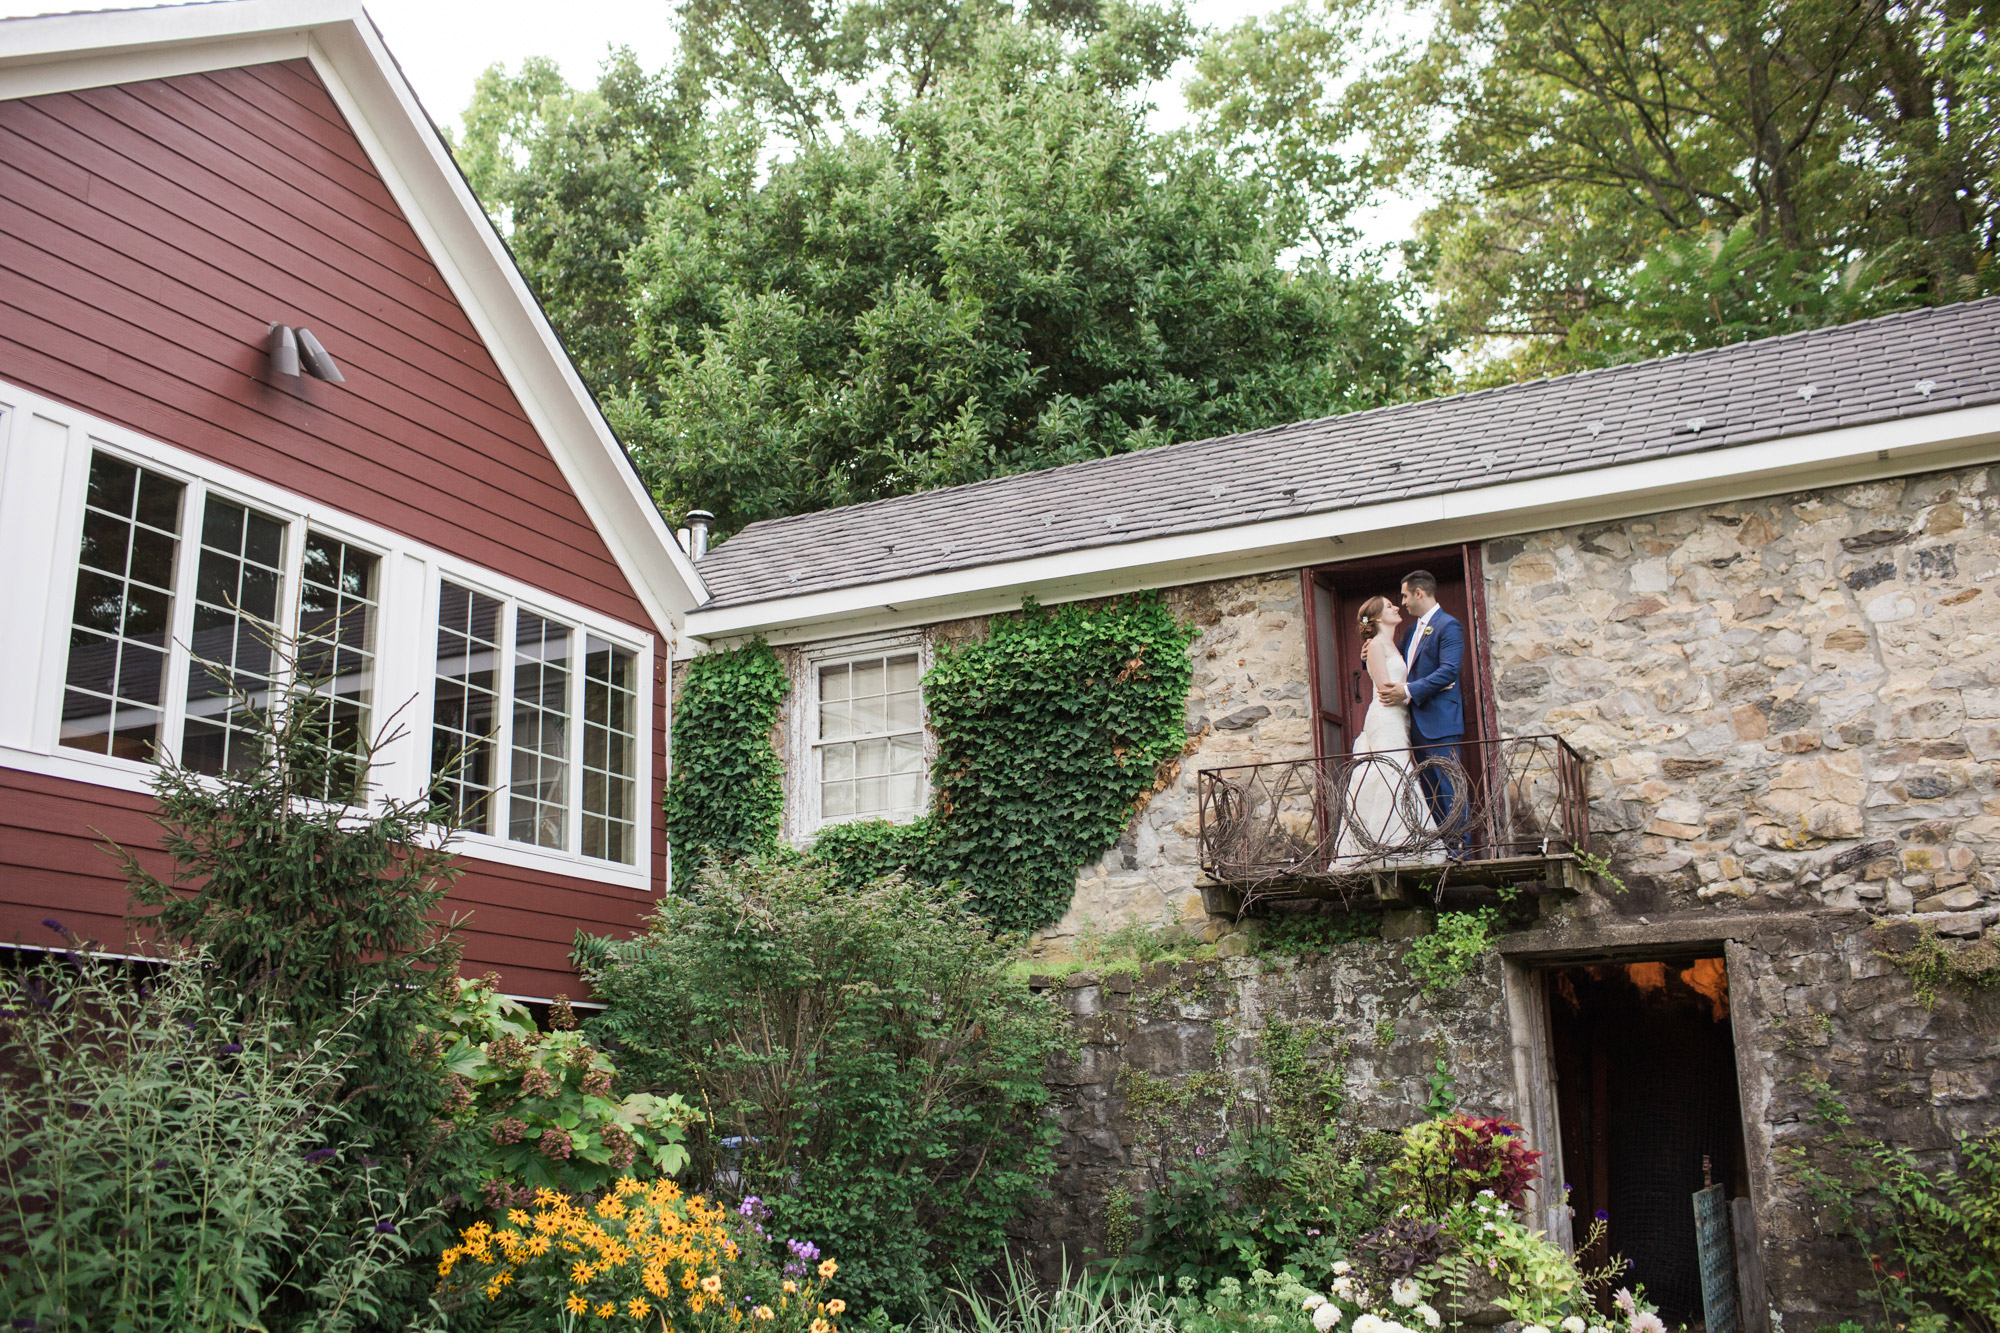 Wedding at Crossed Keys Estate in Andover, New Jersey.